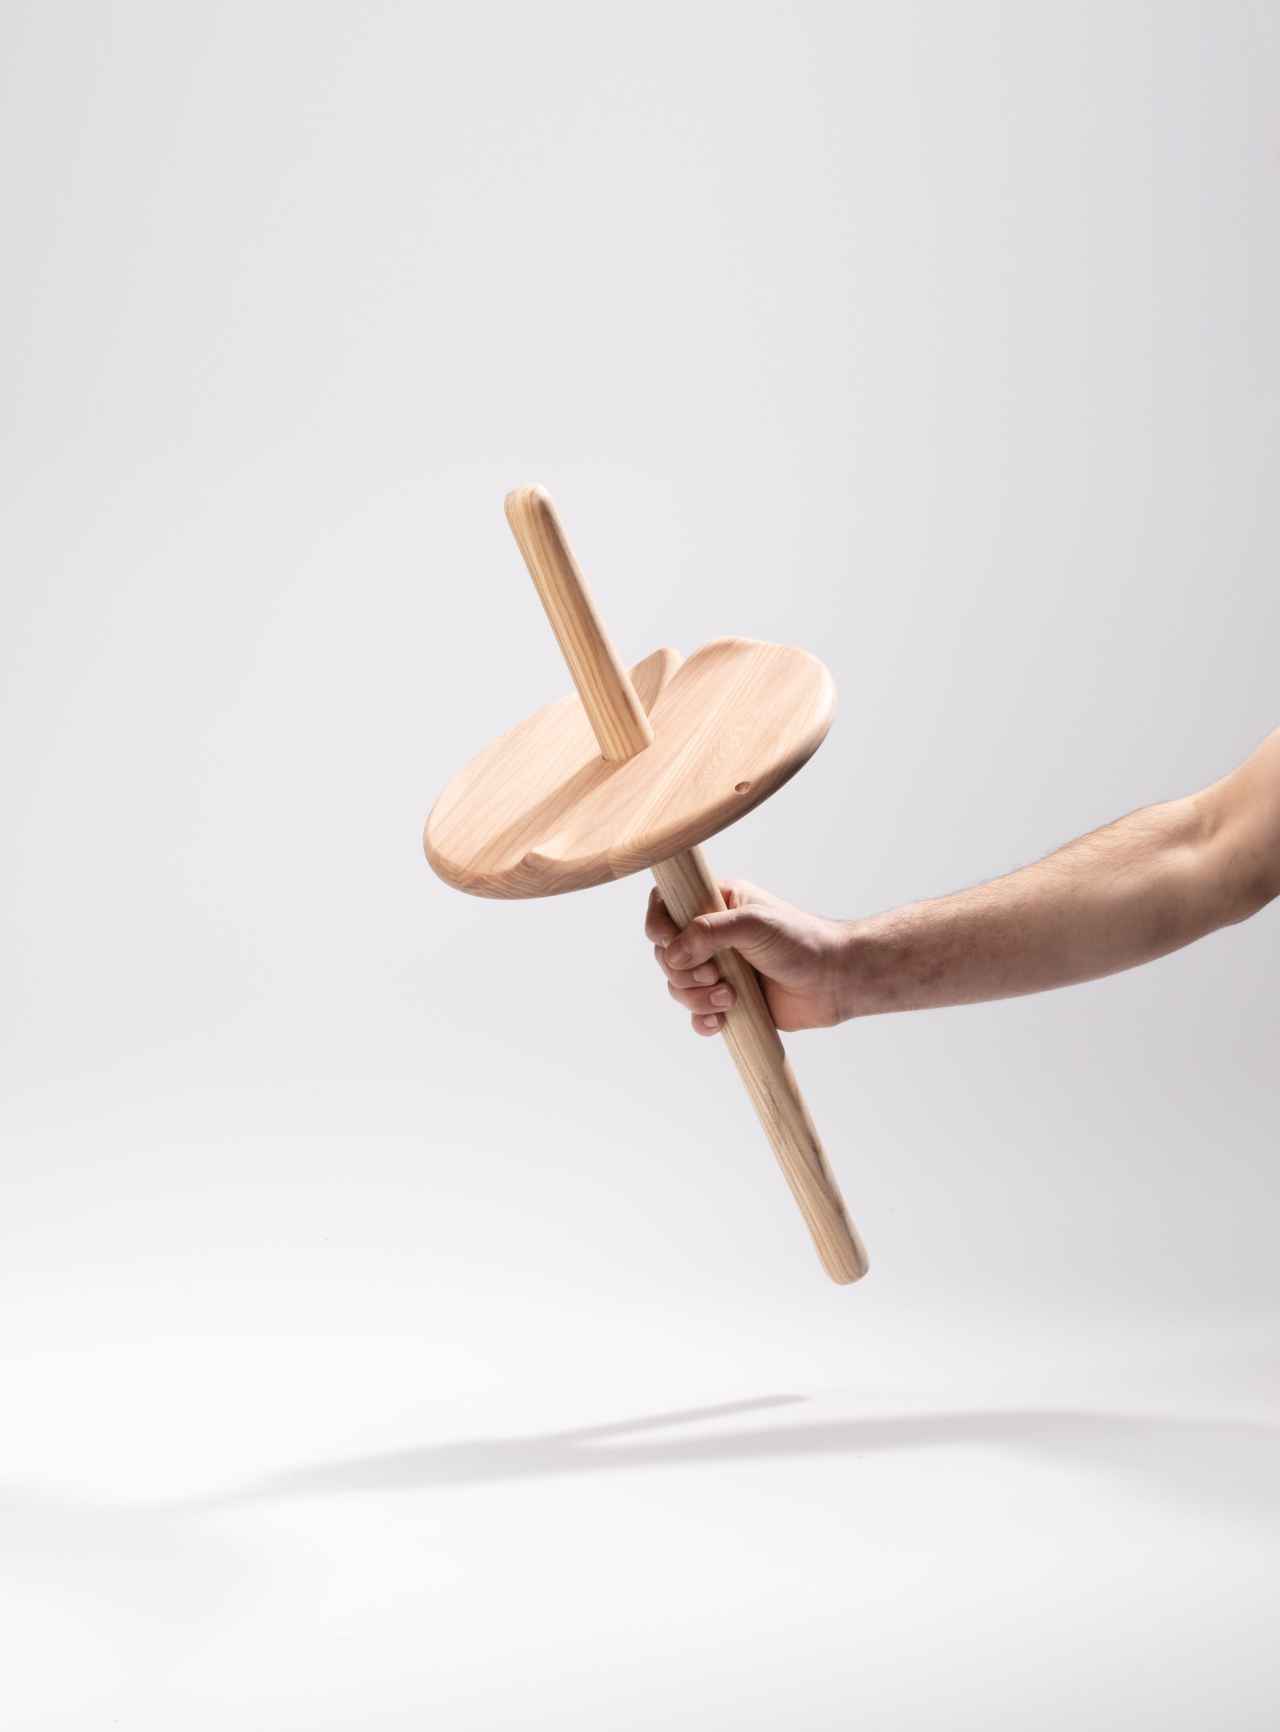 assembled circular seat plate and wooden pole, creating a seat